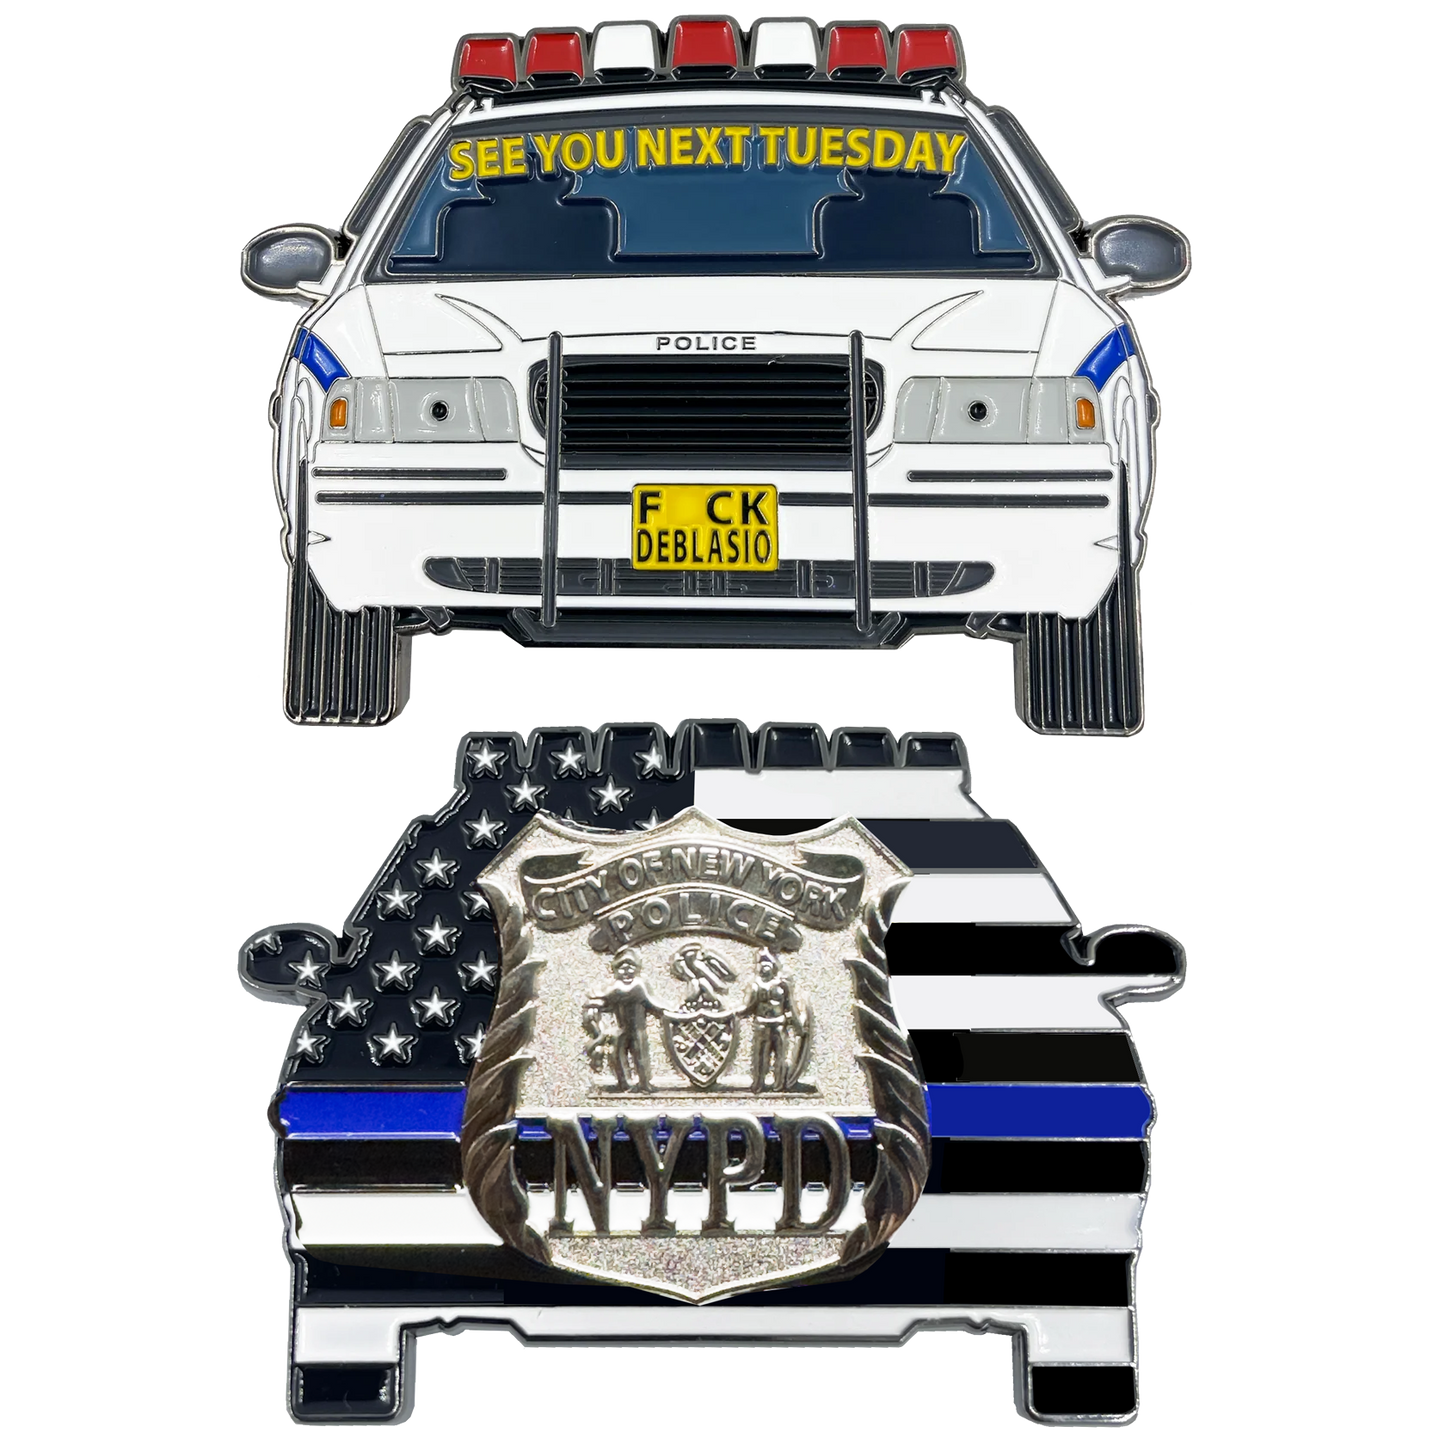 EL14-009 New York Police Department See You next Tuesday DeBlasio Challenge Coin Police Thin Blue Line